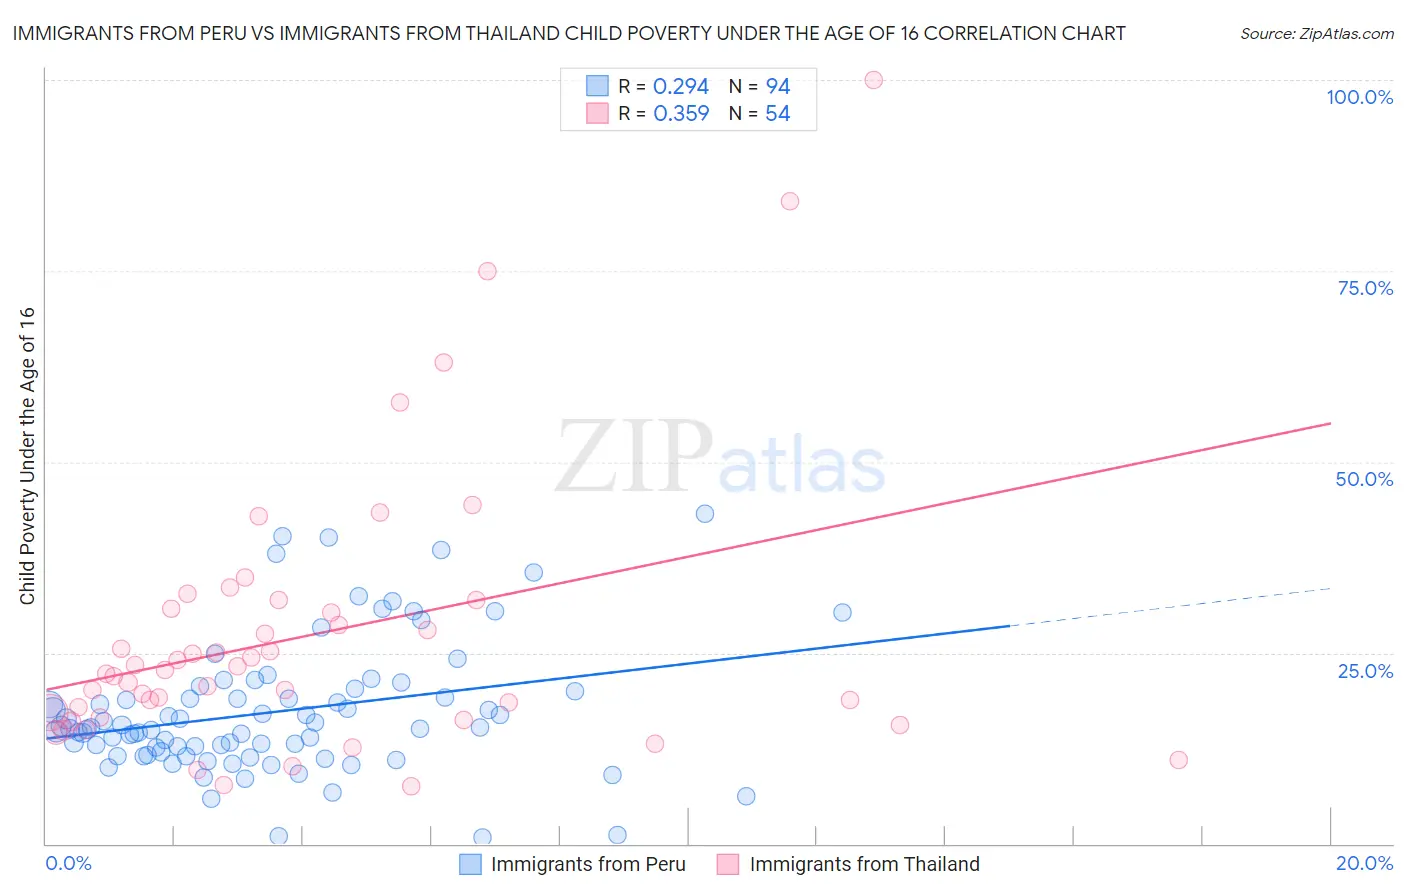 Immigrants from Peru vs Immigrants from Thailand Child Poverty Under the Age of 16